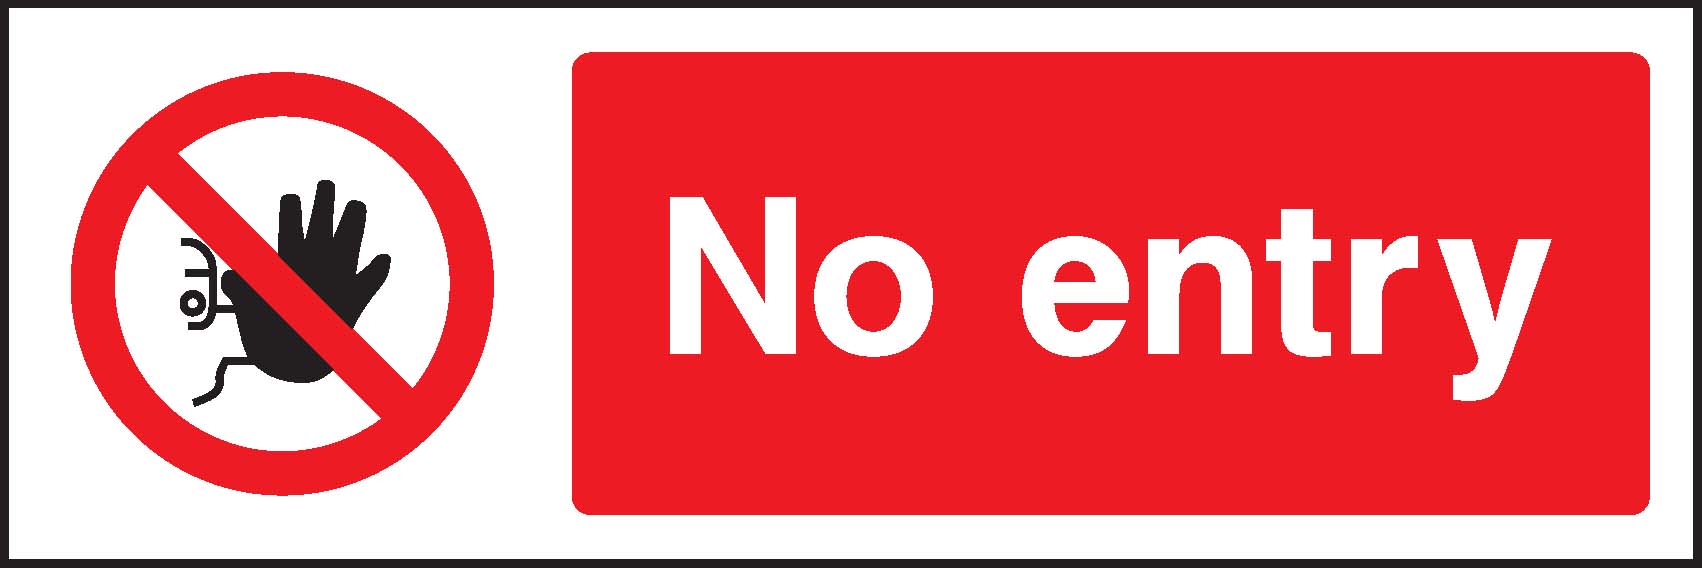 Allow images. No entry. No entry знак. Знак no entry allowed. Entry картинки.